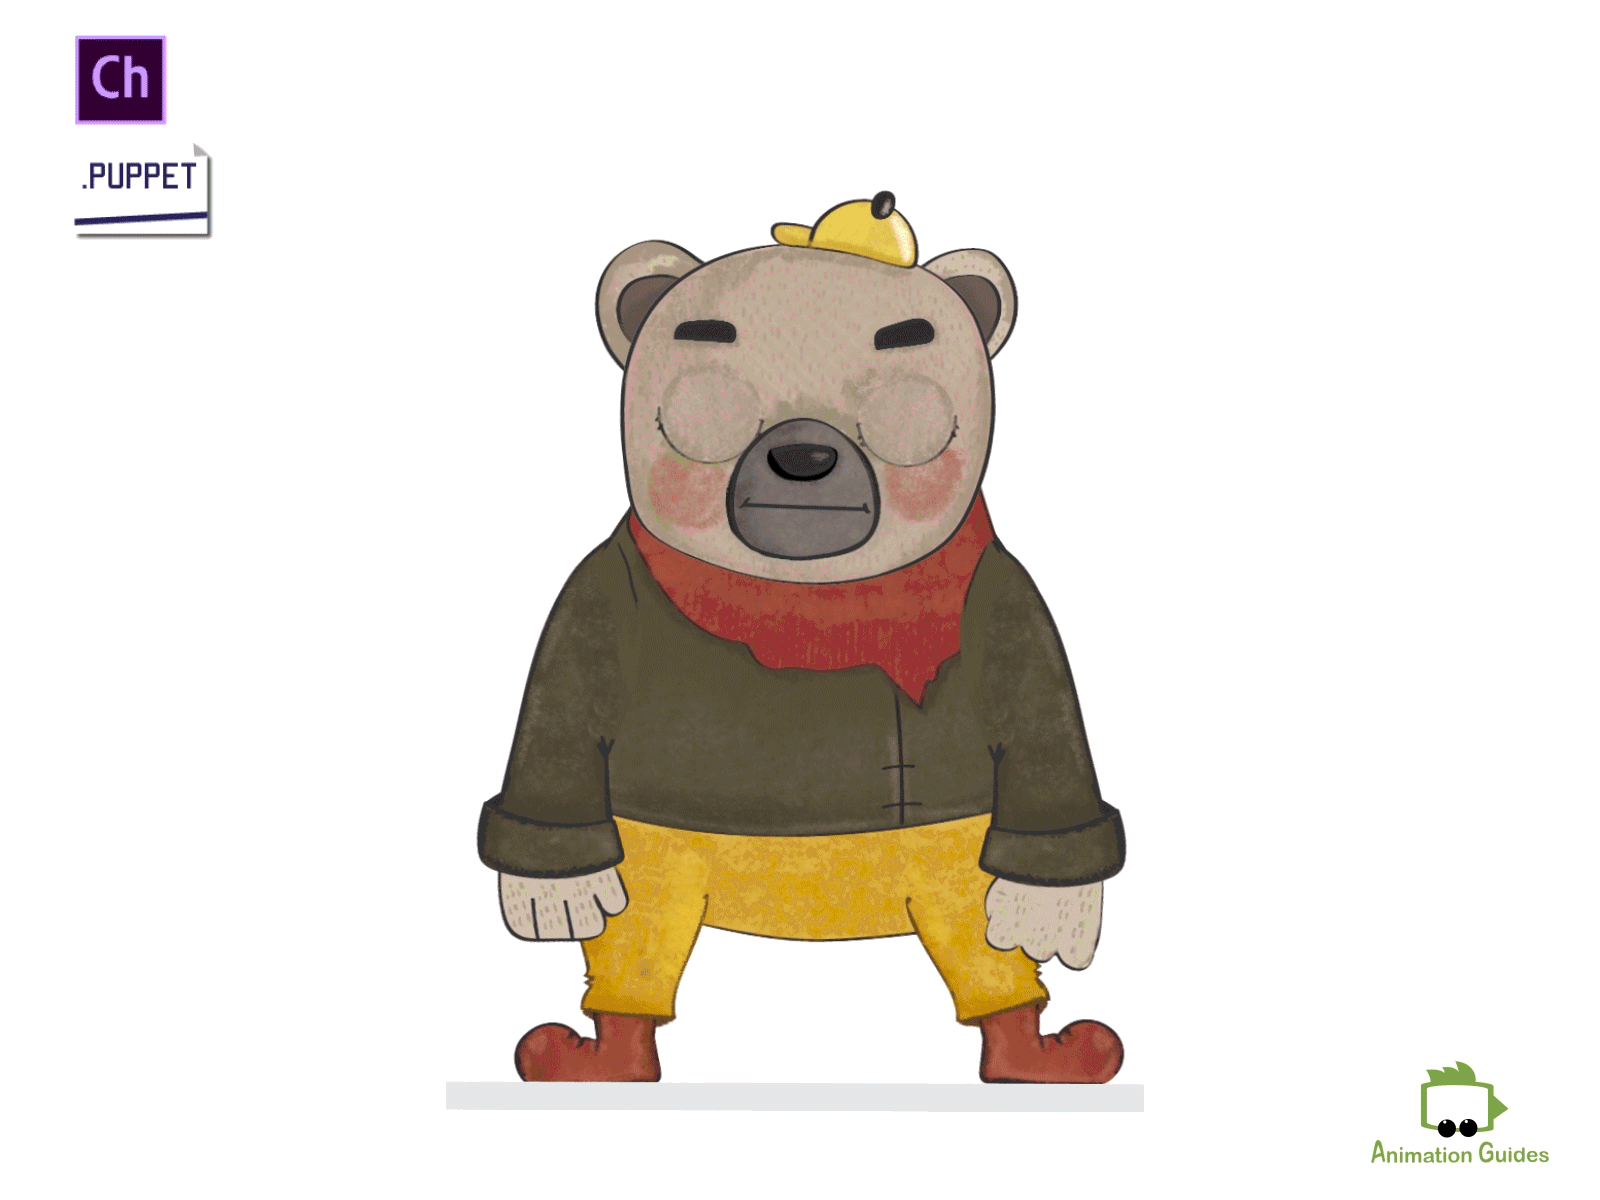 Hugs Time... 😍😍😍 adobe character animator animated animation bear cartoon character character animator character design download illustration procreate puppet